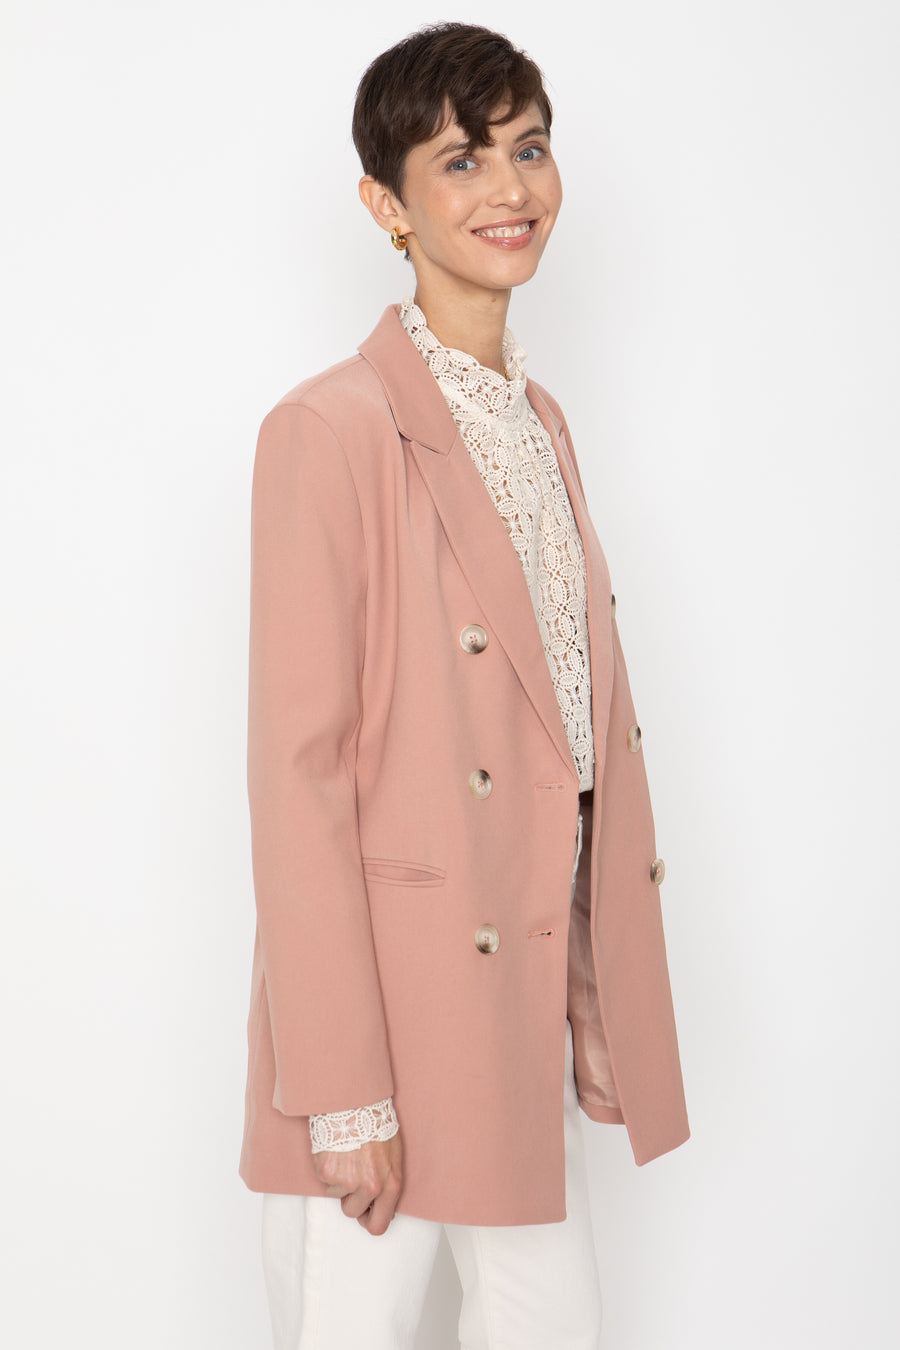 No Srcipt image - Images of 4 of 7 Dusty Rose Pink Color Way Wool Fabric Classic Double Breasted Staple Jacket Women's Workwear Office Wear Women's Fashion Sophisticated Style Chic Simple Staple Classic Pink Blazer Fall Jacket Fall Fashion Women's Outerwear Timeless Everyday Blazer Neutral Color The Emory Blazer In Dusty Rose Professional Attire